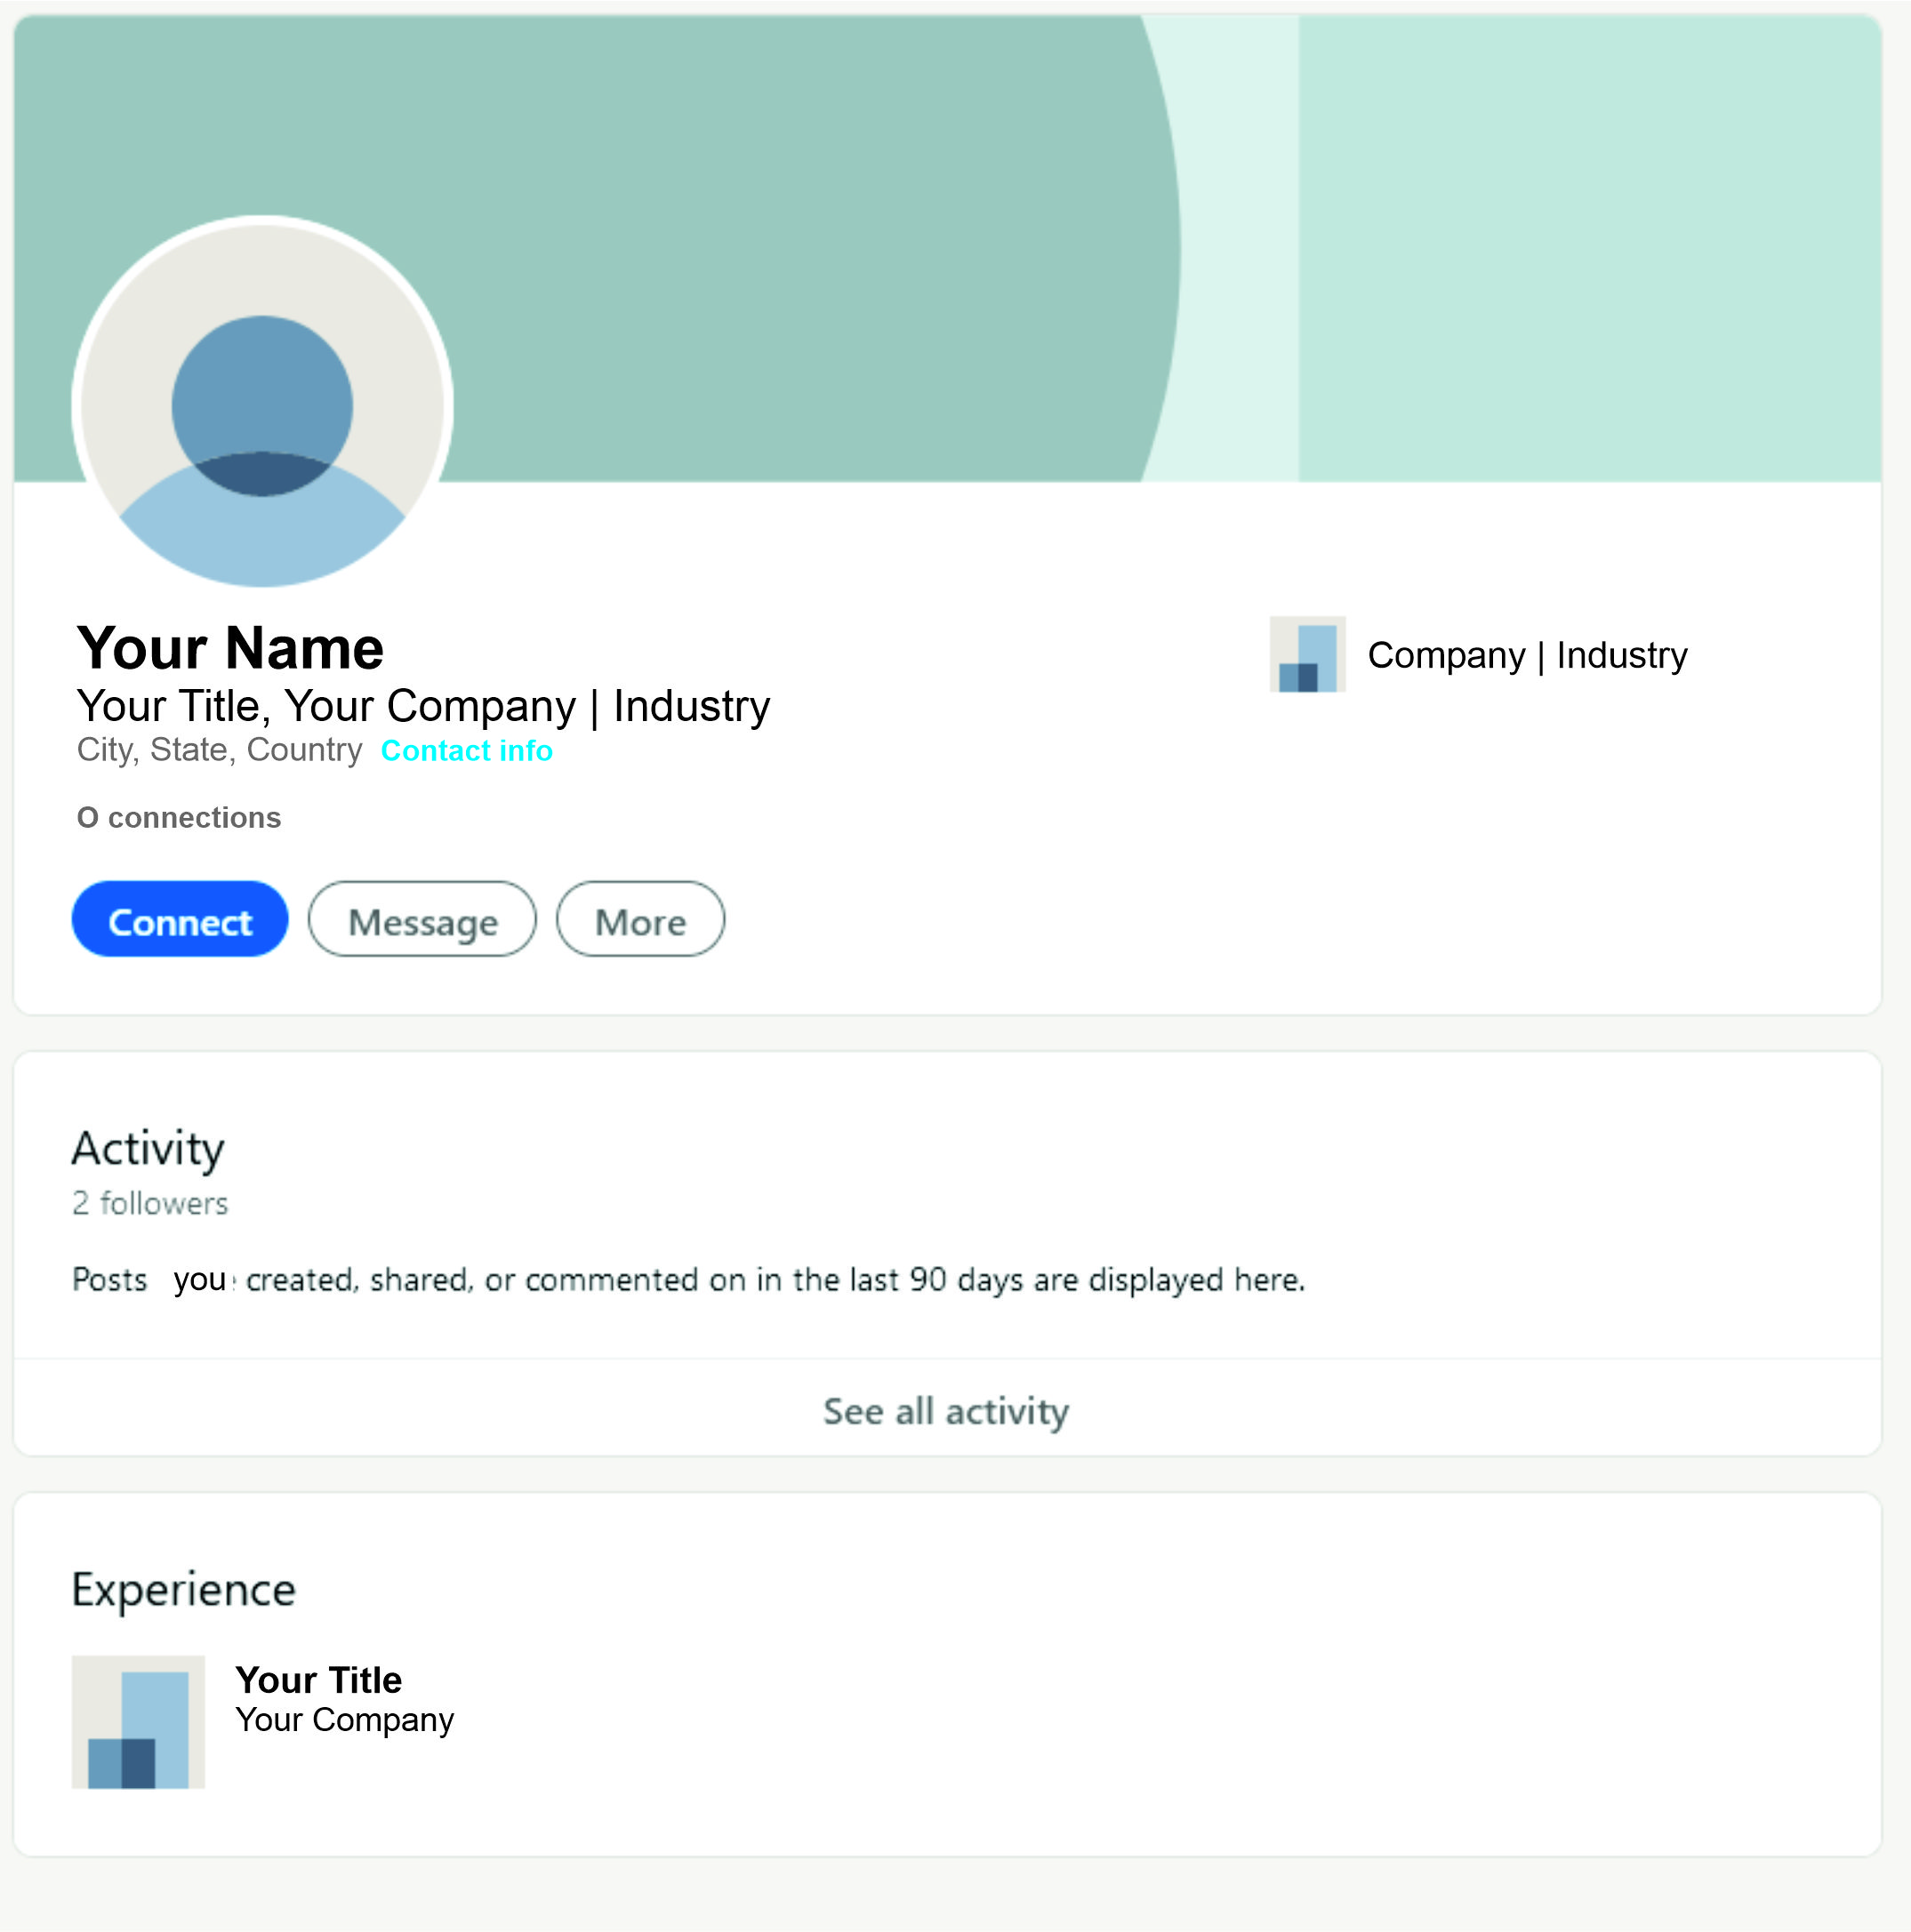 Your Name a Company | Industry

Your Title, Your Company | Industry
City, State, Country Contact info

O connections

Activity
2 followers

Posts you: created, shared, or commented on in the last 90 days are displayed here.

See all activity

Experience

Your Title
a Your Company